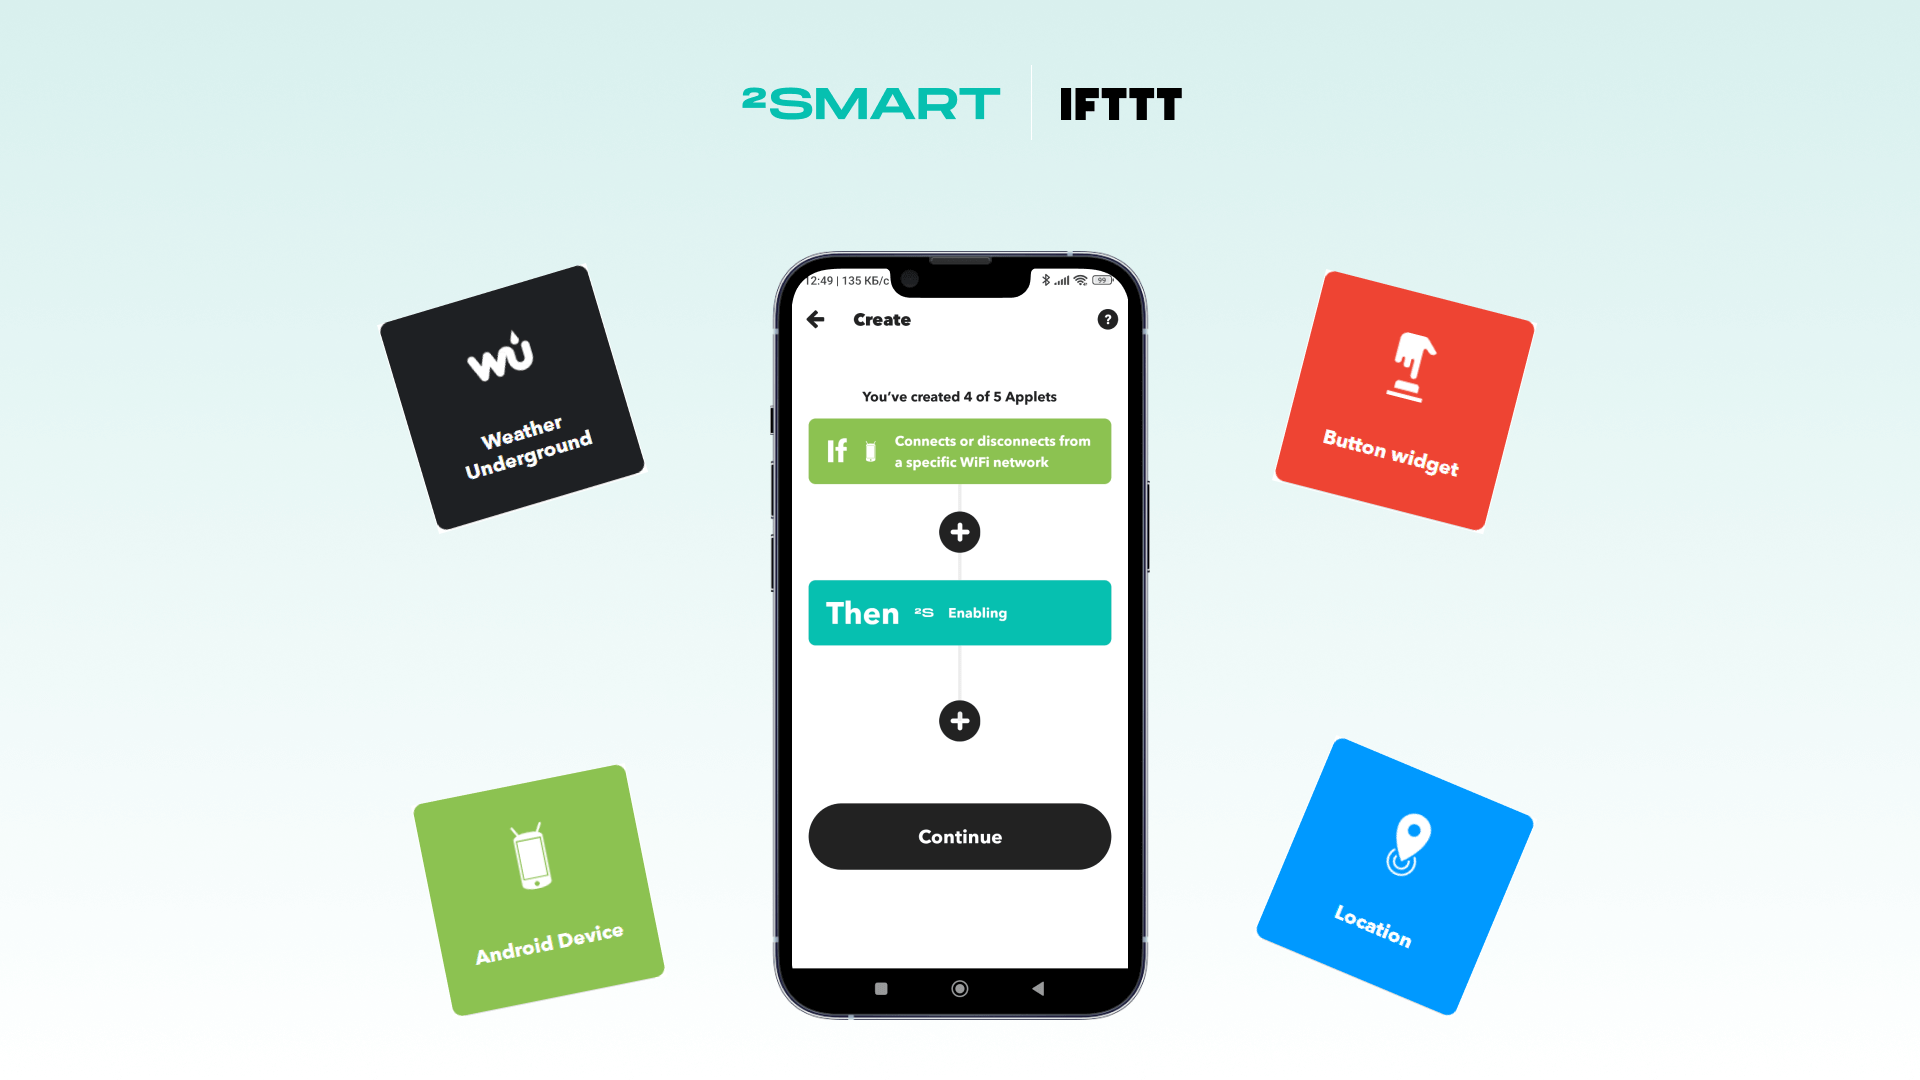 Top 5 Useful IFTTT Integrations for 2Smart Cloud Device Users